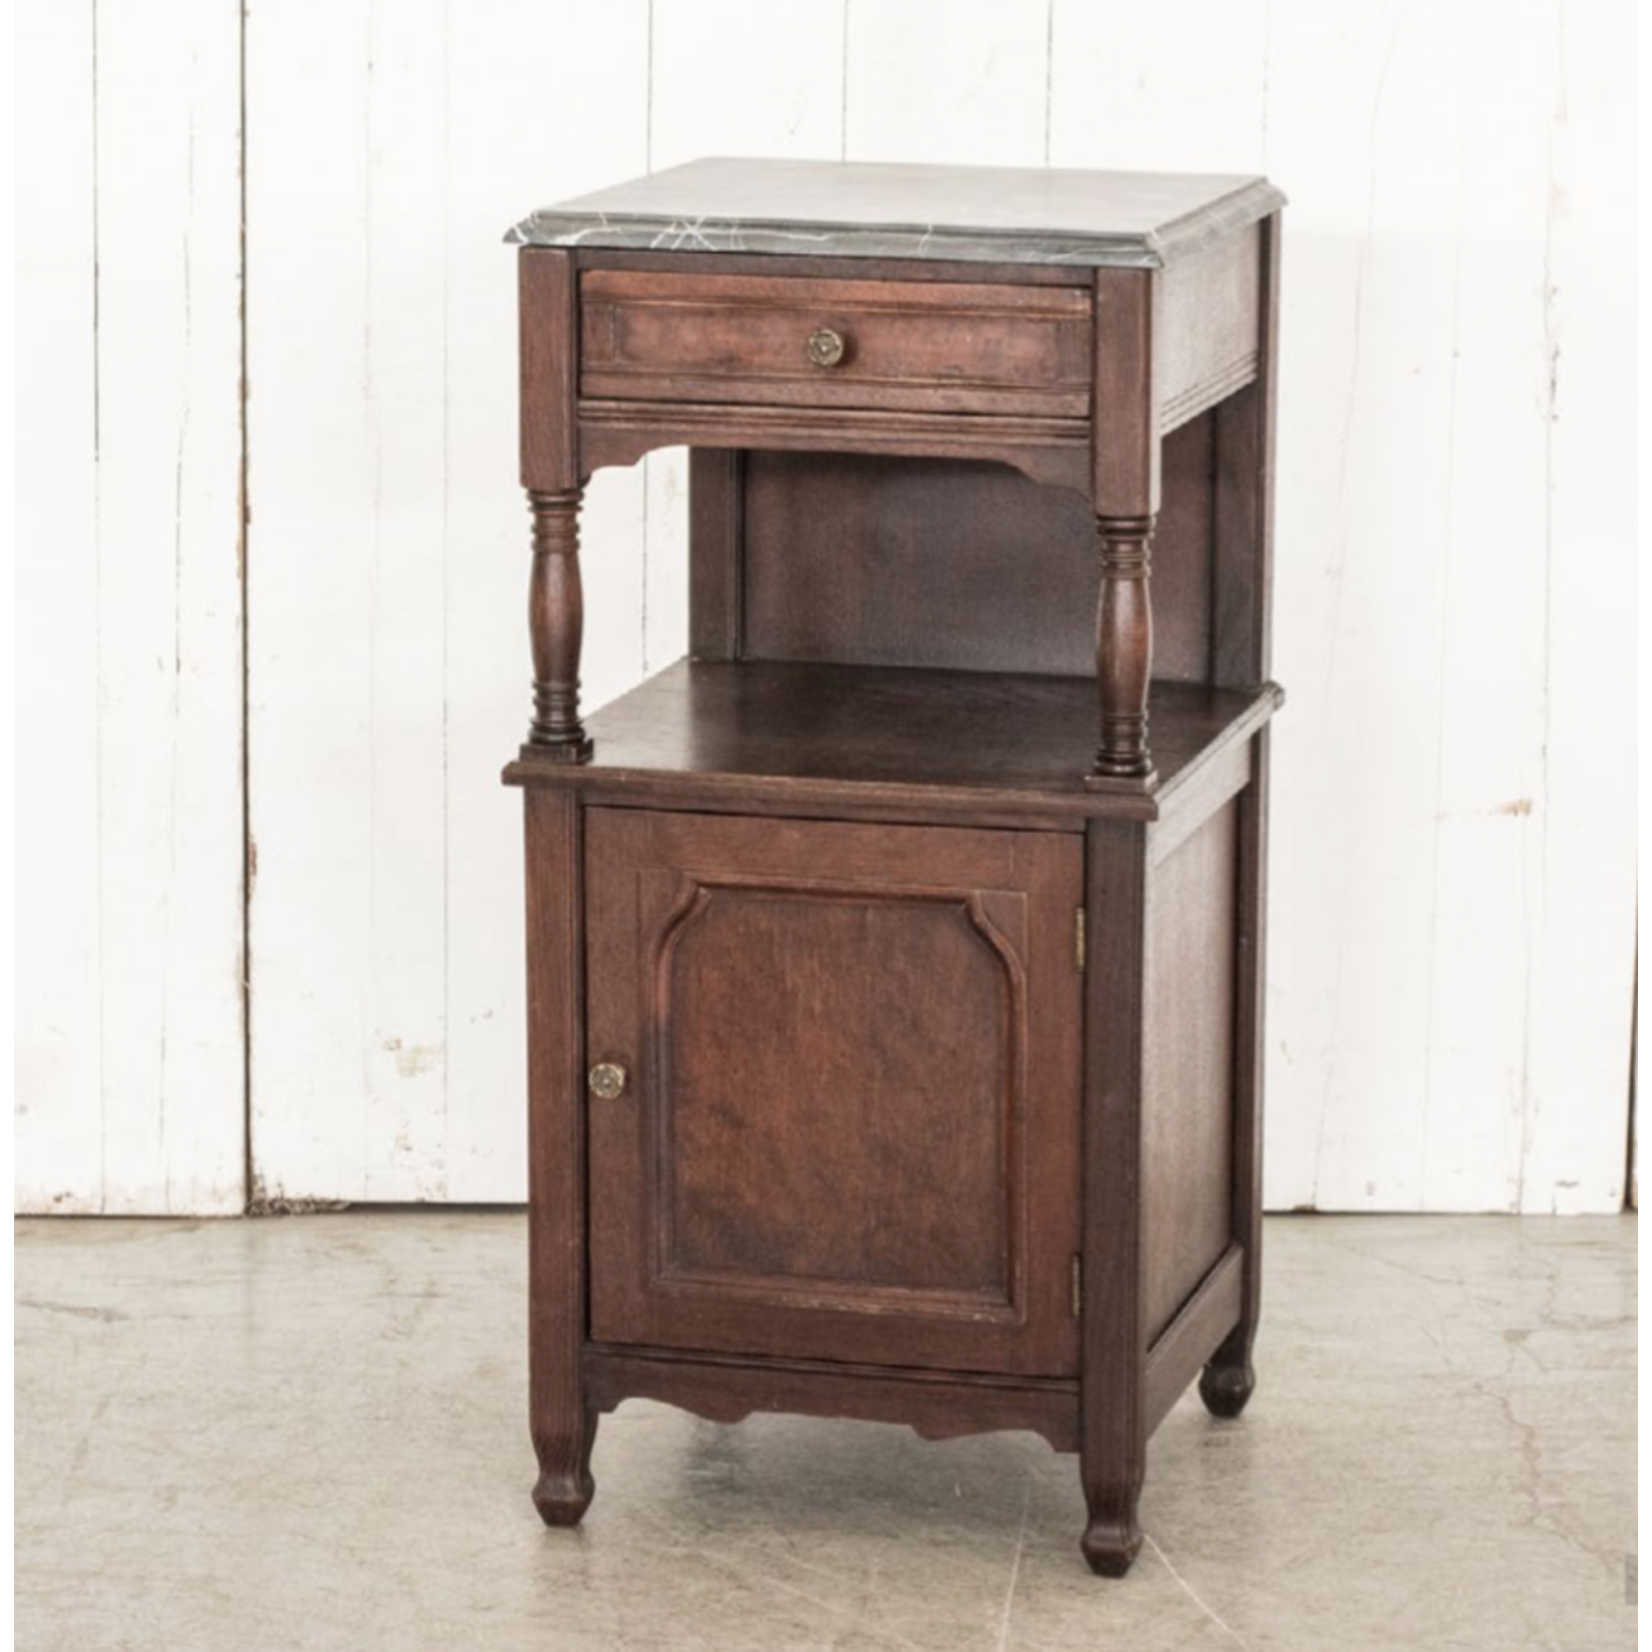 VAN THIEL SIDE TABLE ANITQUE FRENCH NIGHT STAND